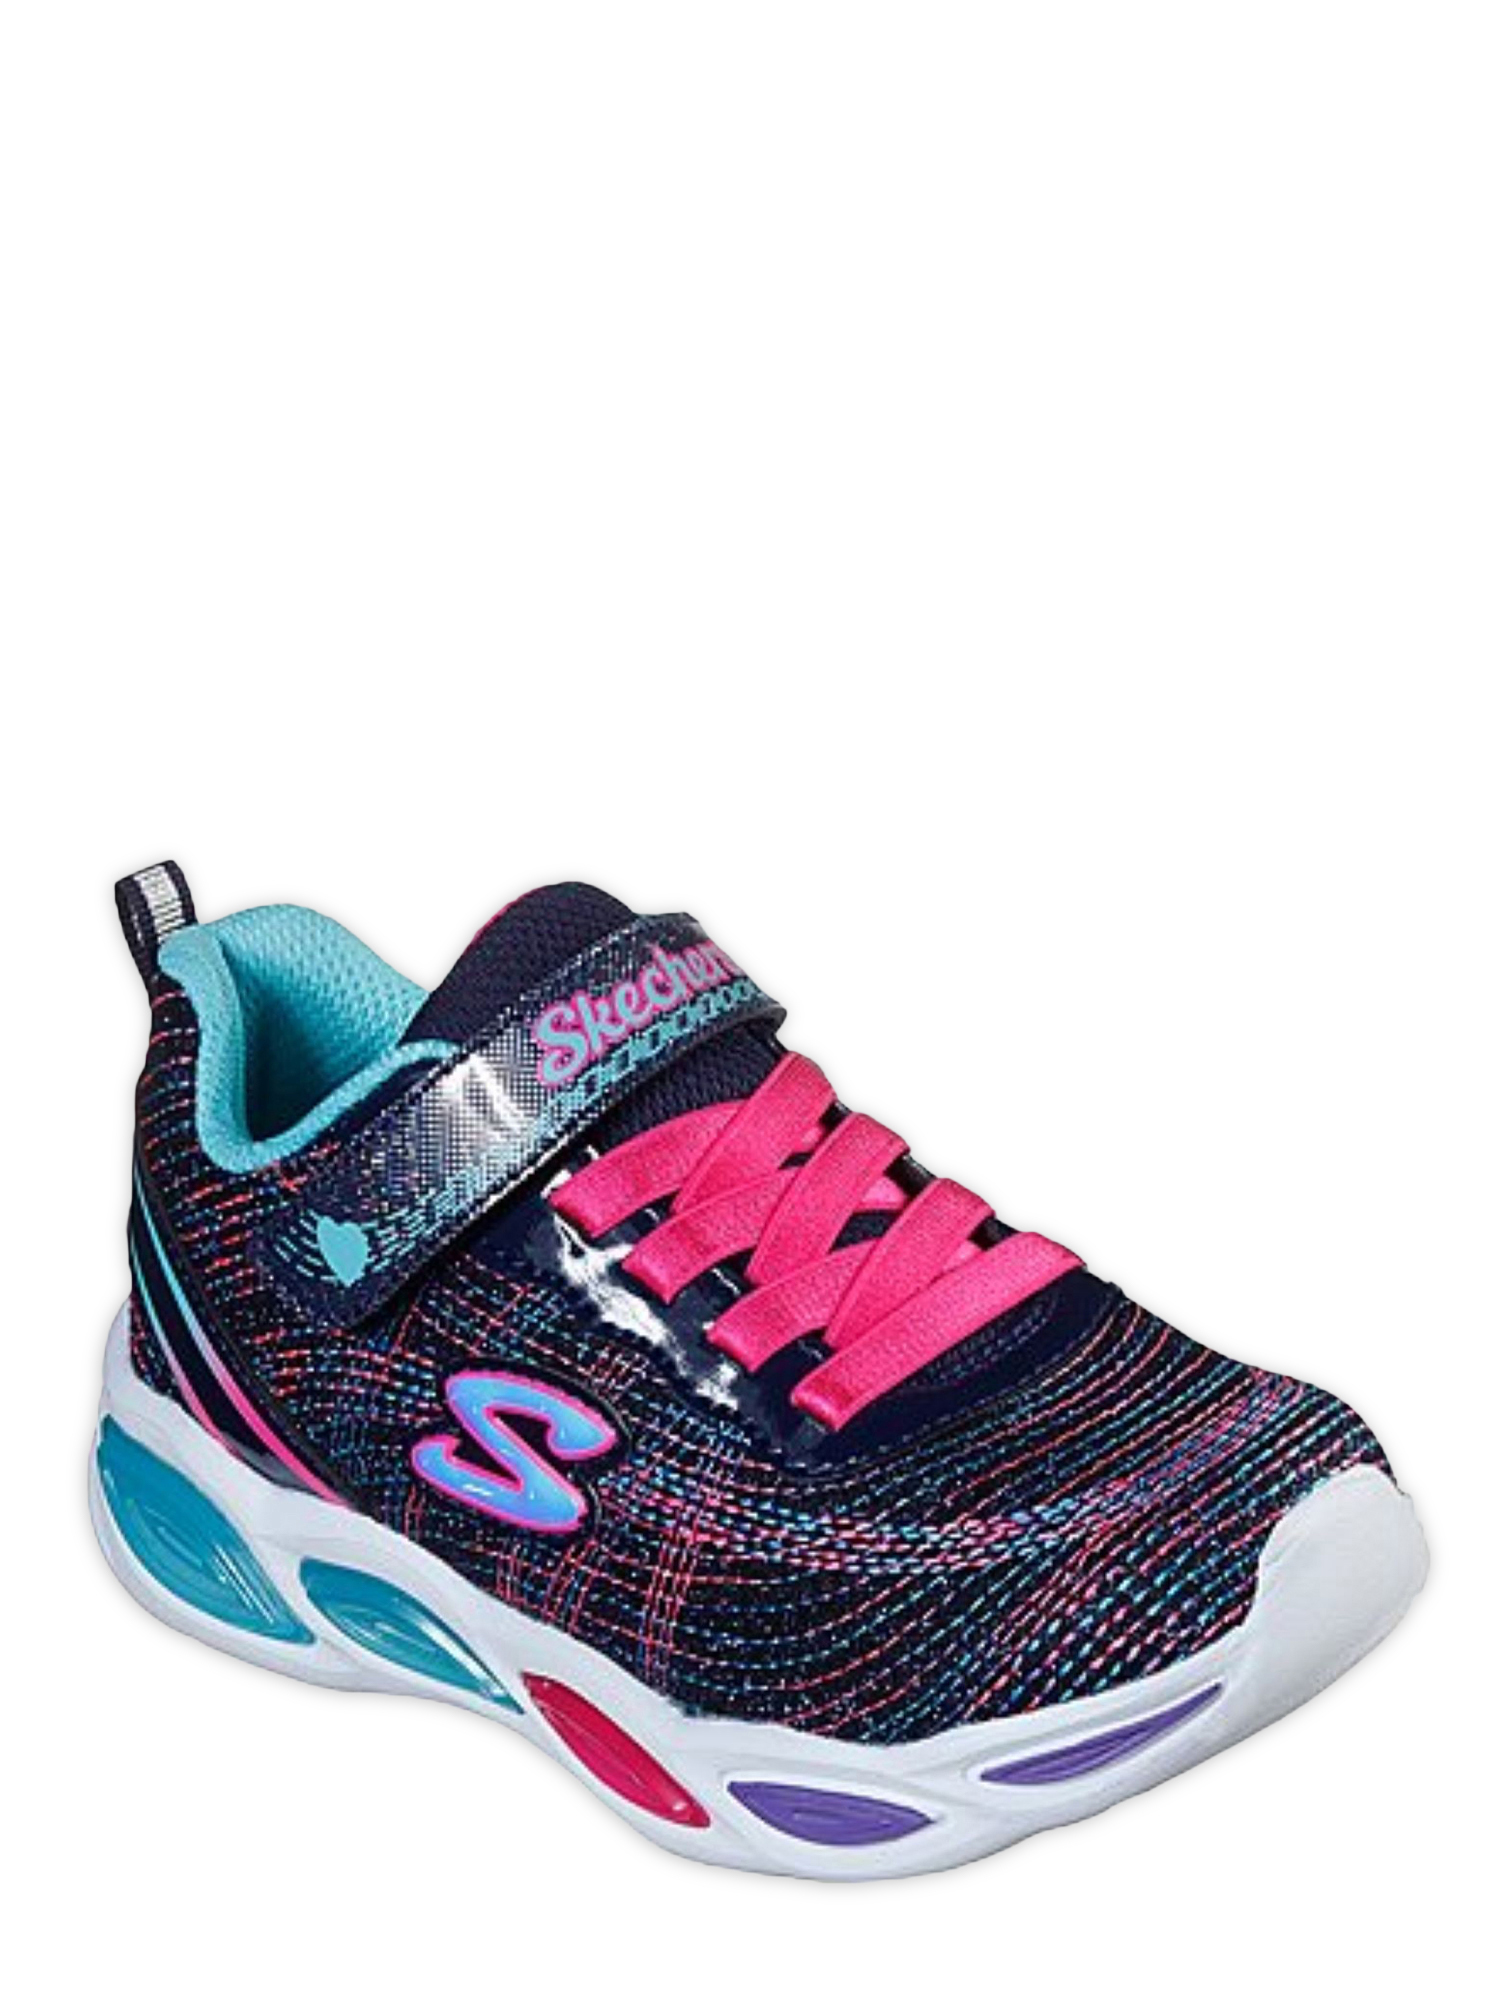 Skechers Girls Shimmer Beams Lighted Athletic Sneakers(Little Girl and Big Girl) - image 1 of 5